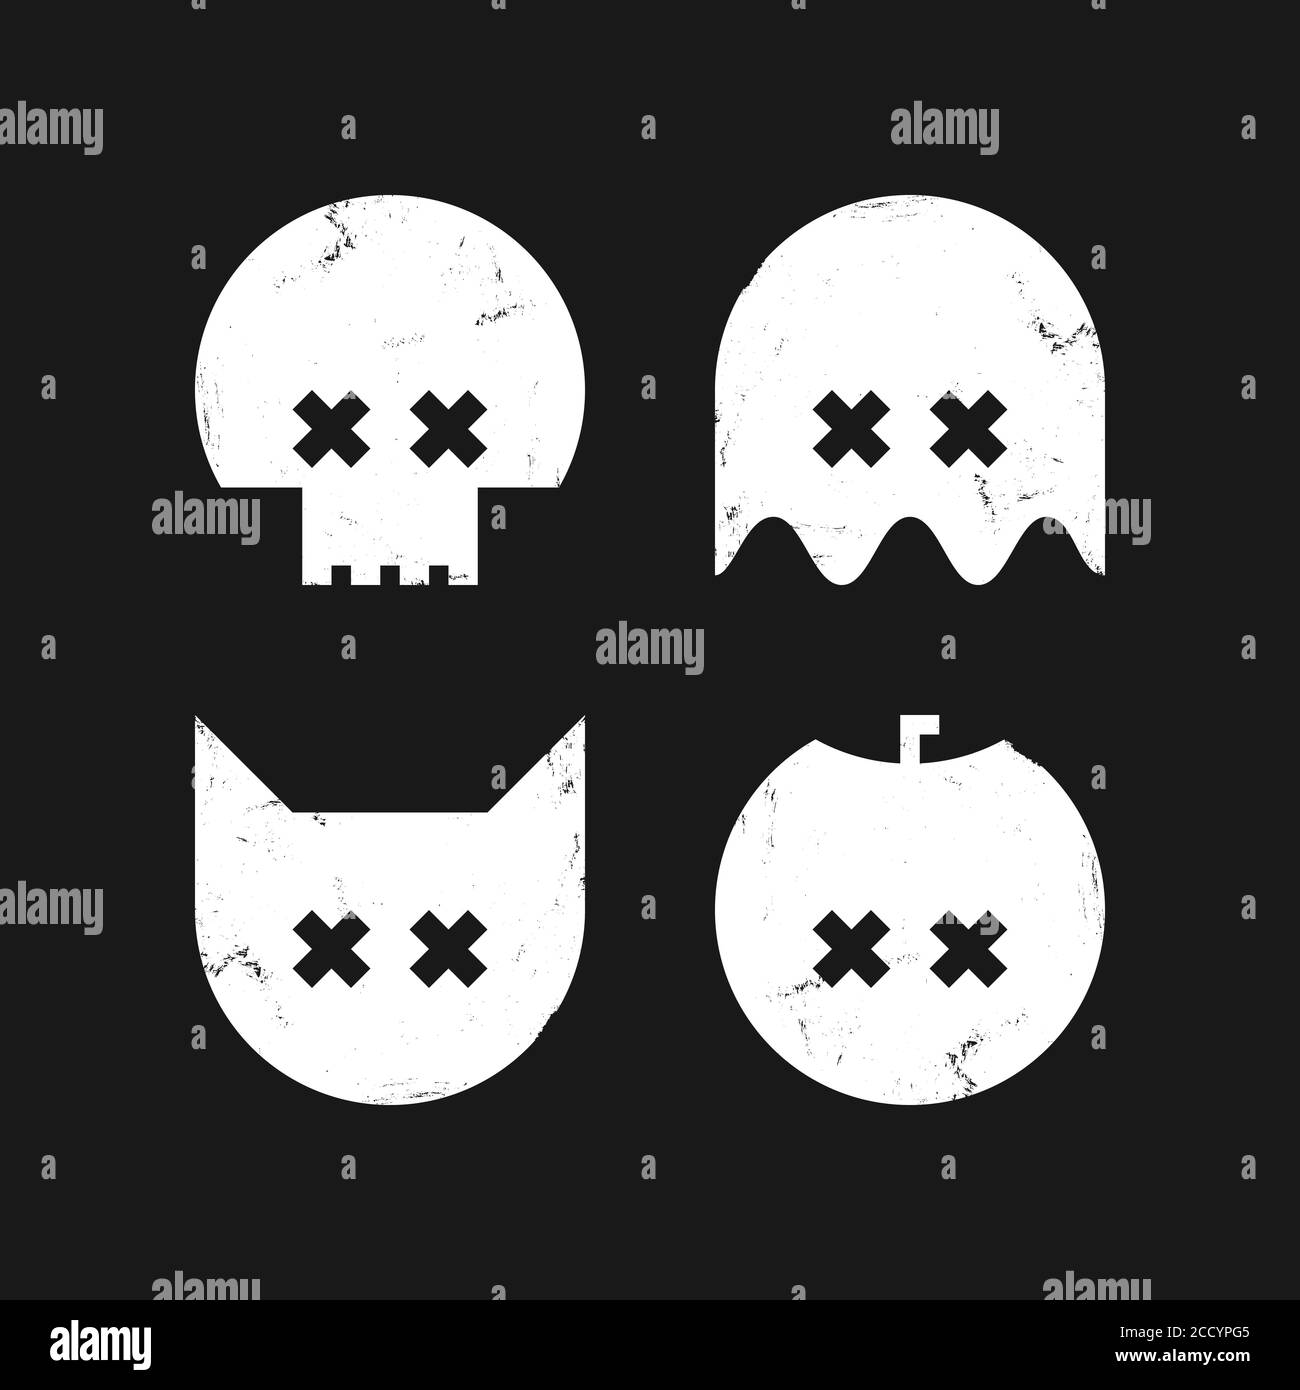 Halloween graphic black and white set. Textured icons of skull, ghost, cat and pumpkin. Stock Vector